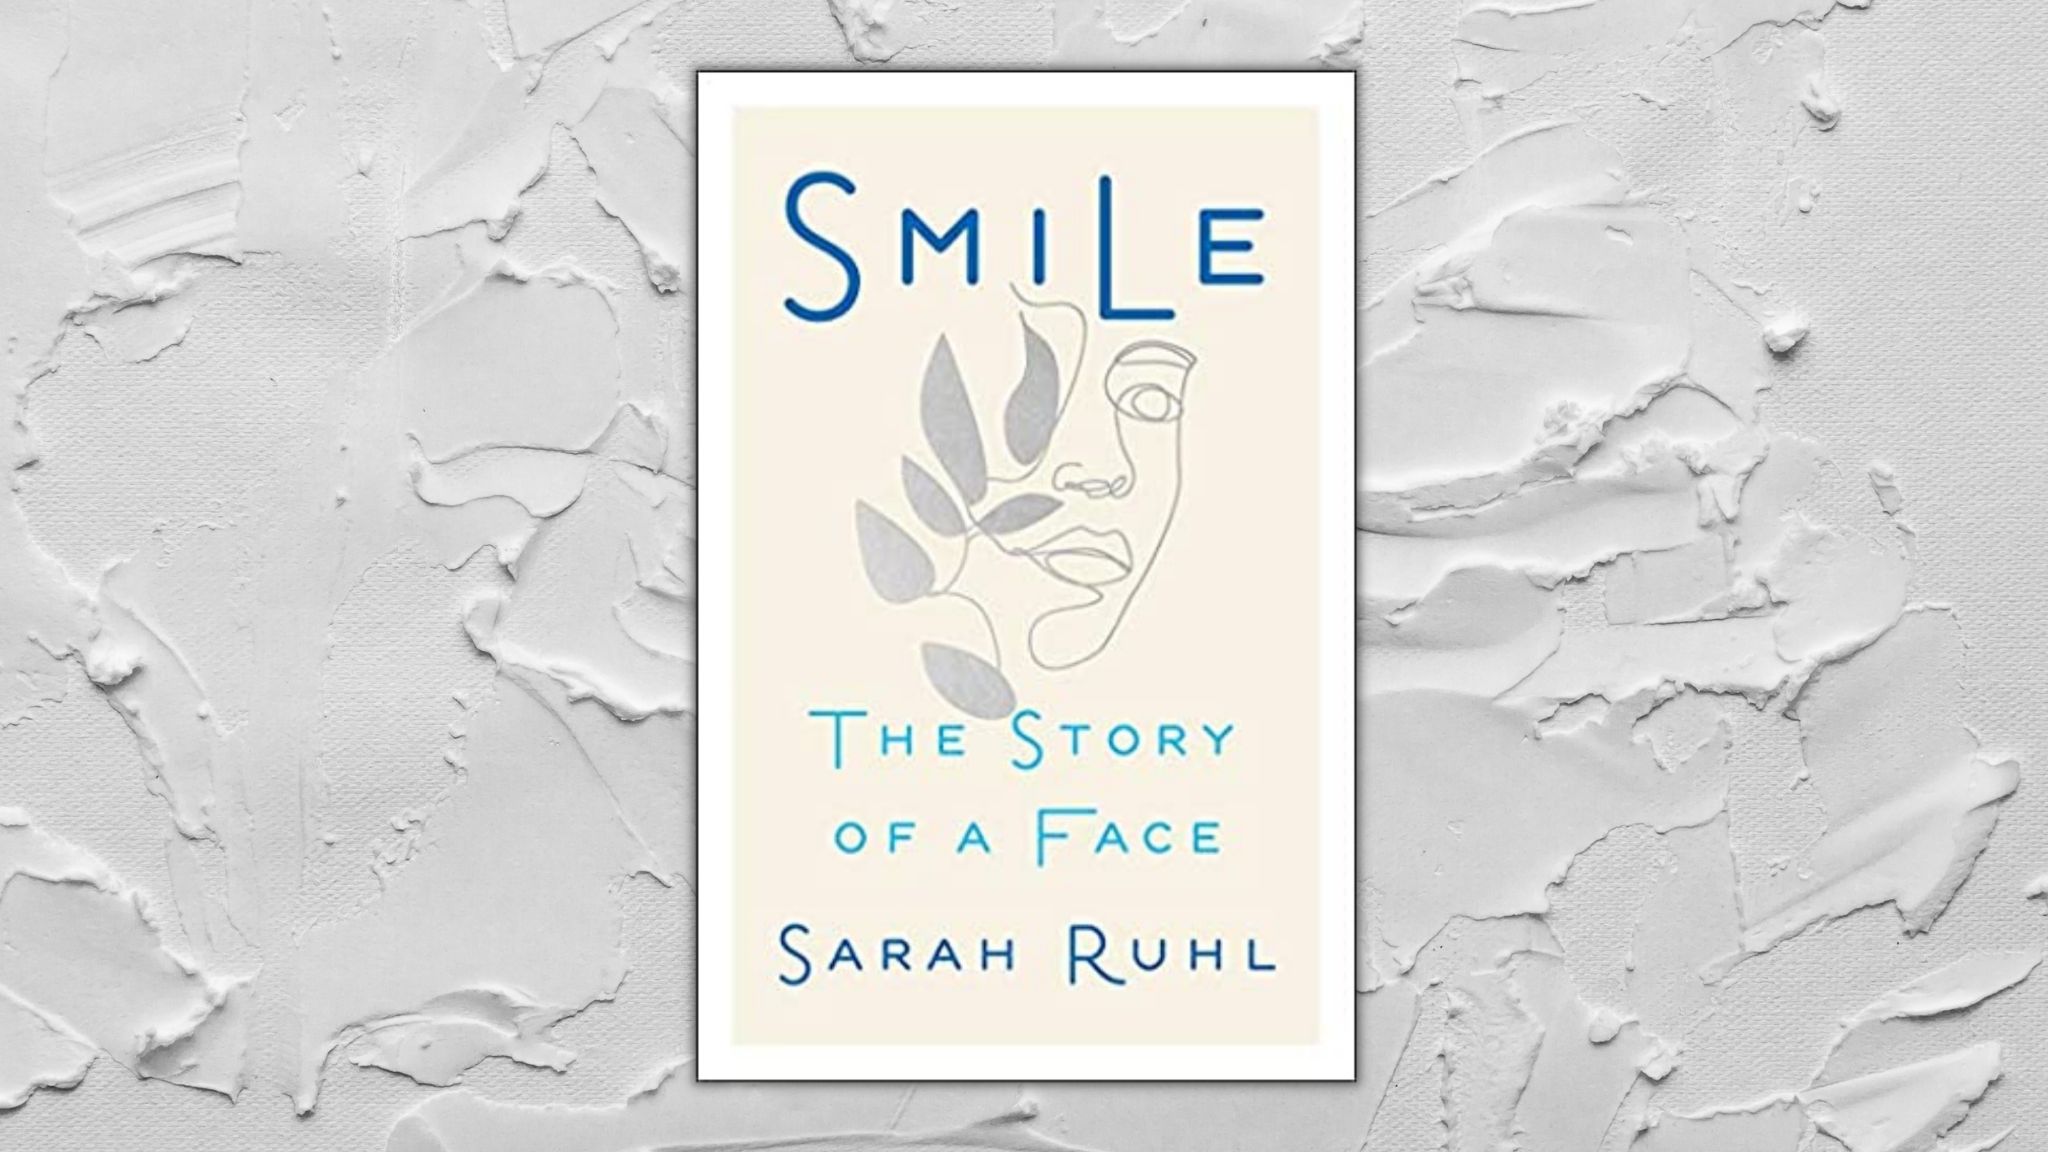 Cover of the book: "Smile" by Sarah Ruhl